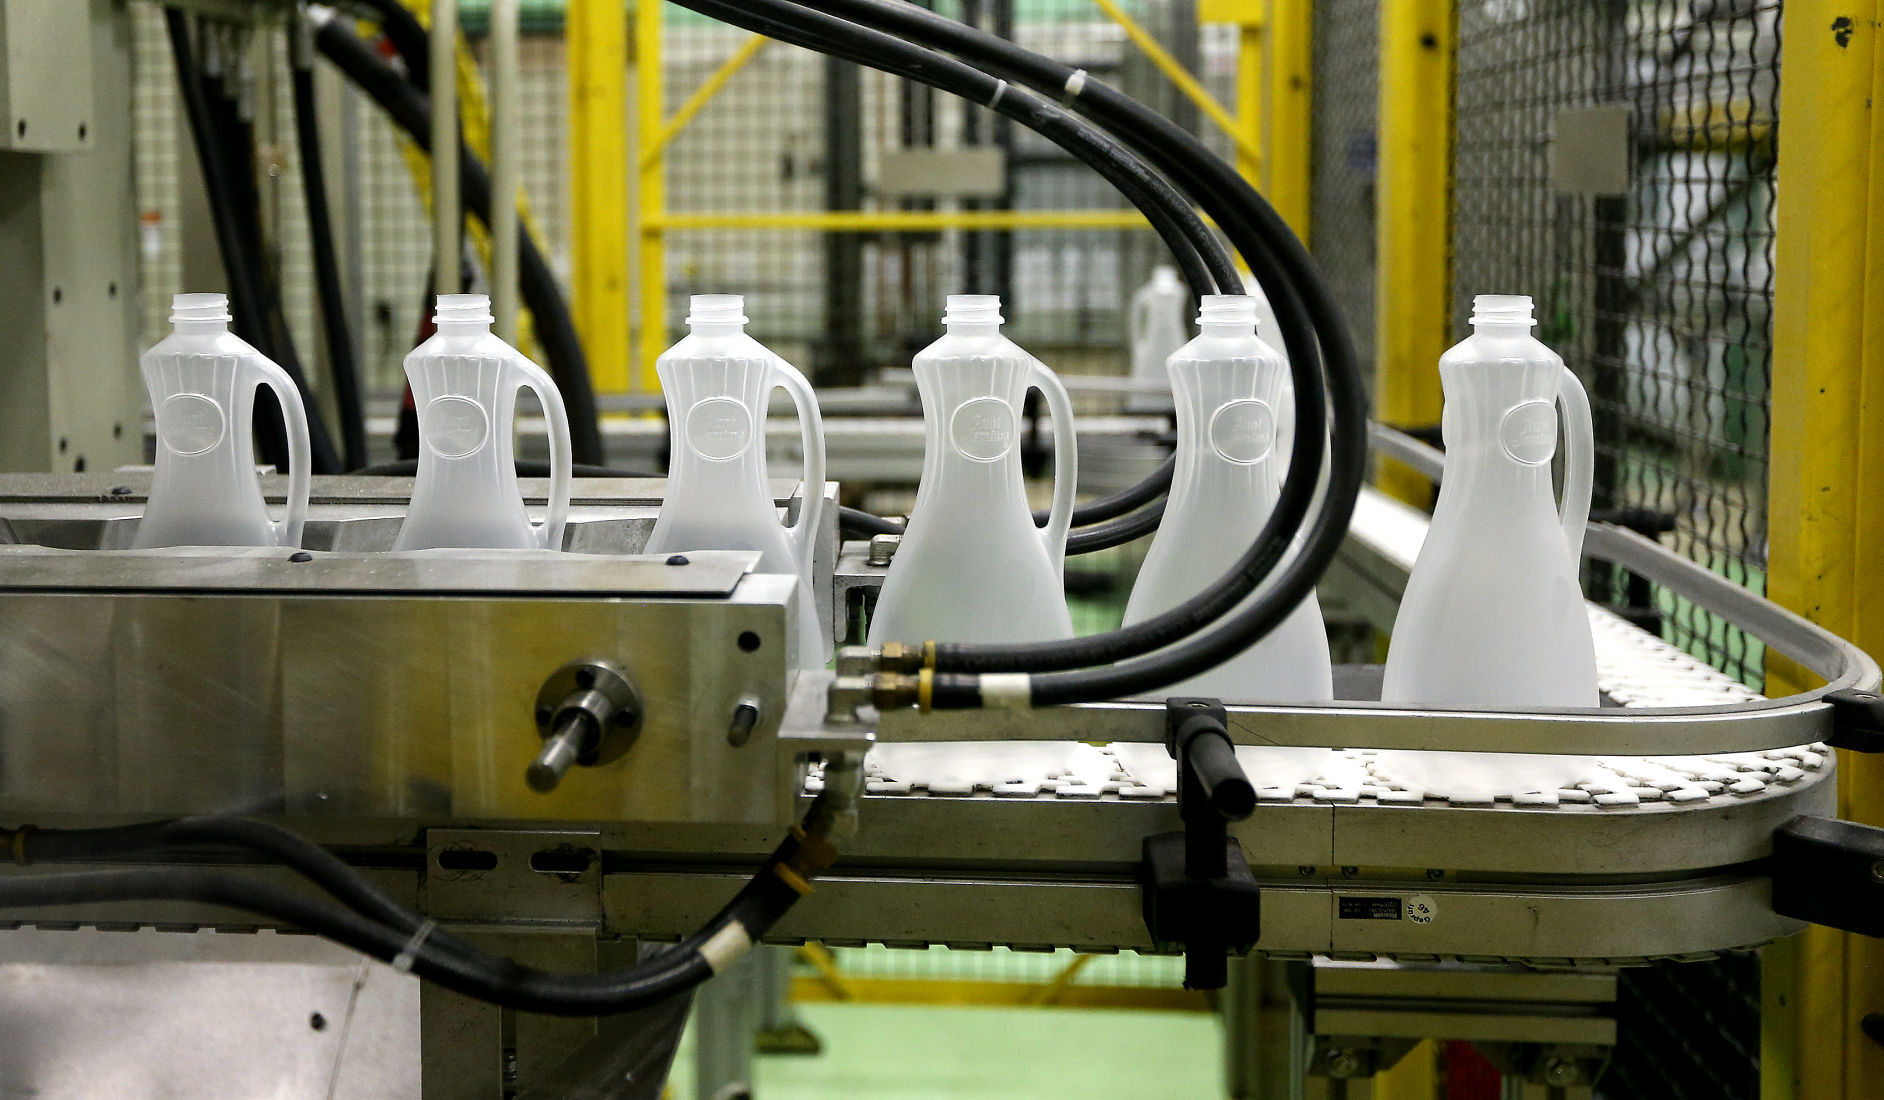 Freshly molded syrup bottles roll off the line. PHOTO CREDIT: DAVE KETTERING